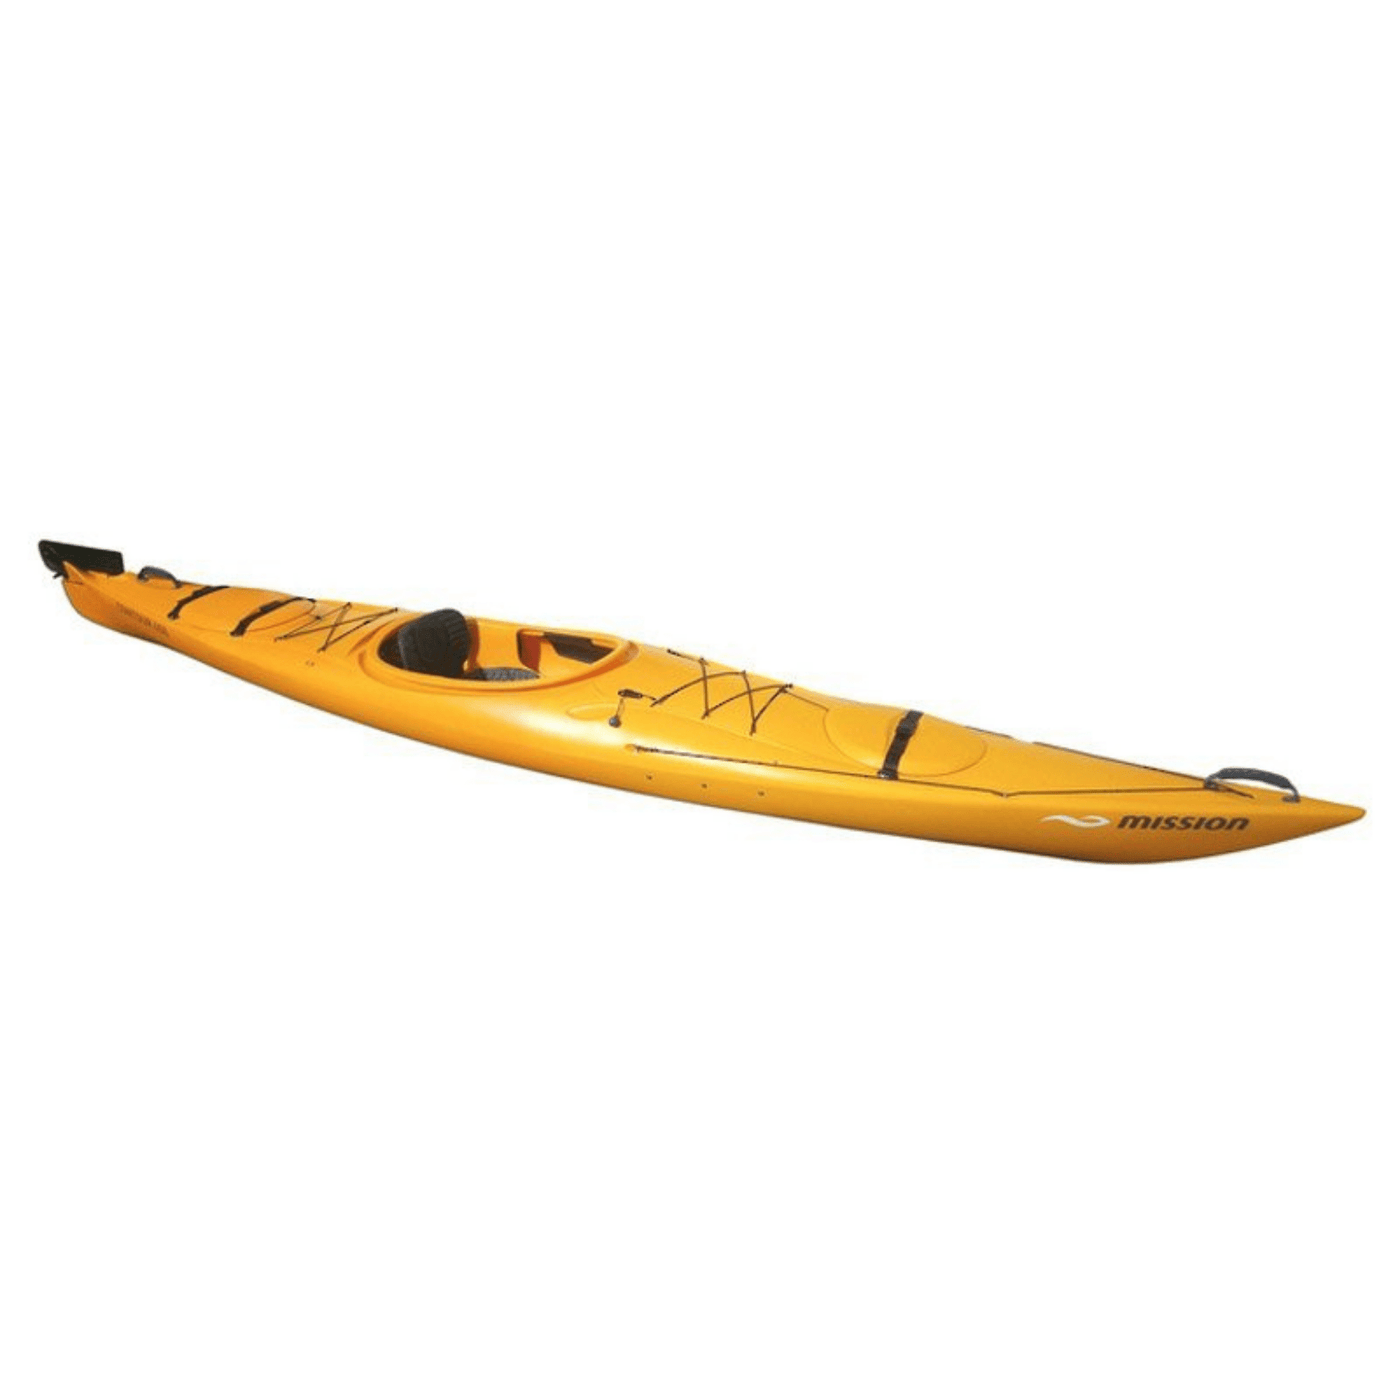 Mission Contour 450 - Expedition | Recreational Kayaks | Further Faster Christchurch NZ